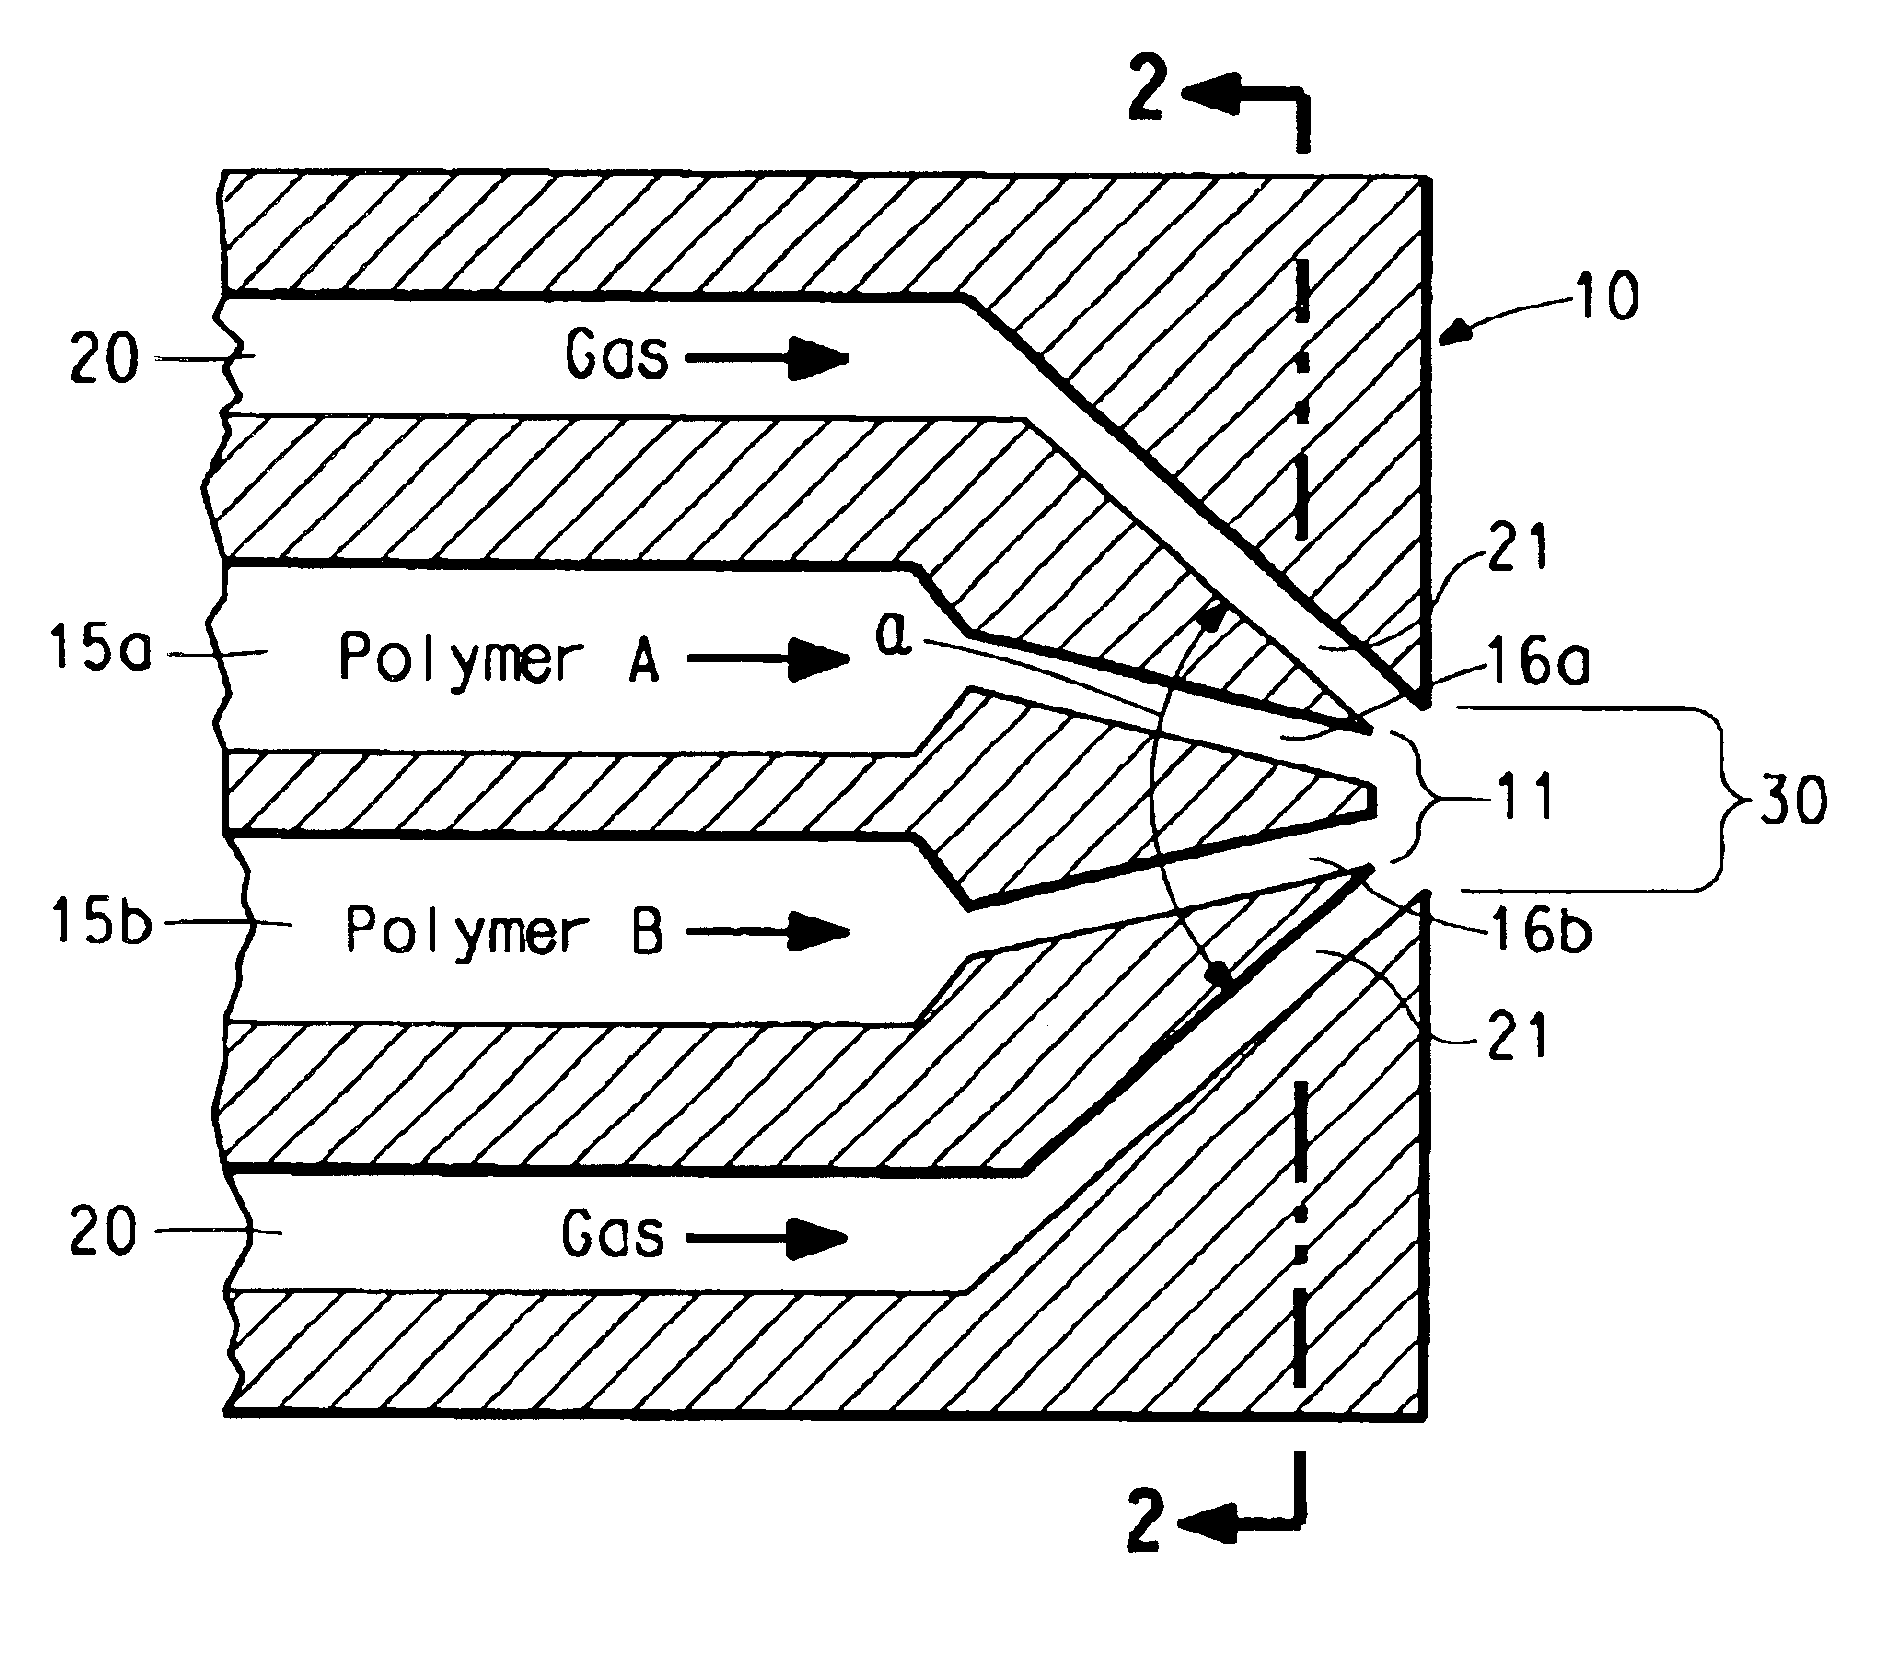 Apparatus for making multicomponent meltblown fibers and webs